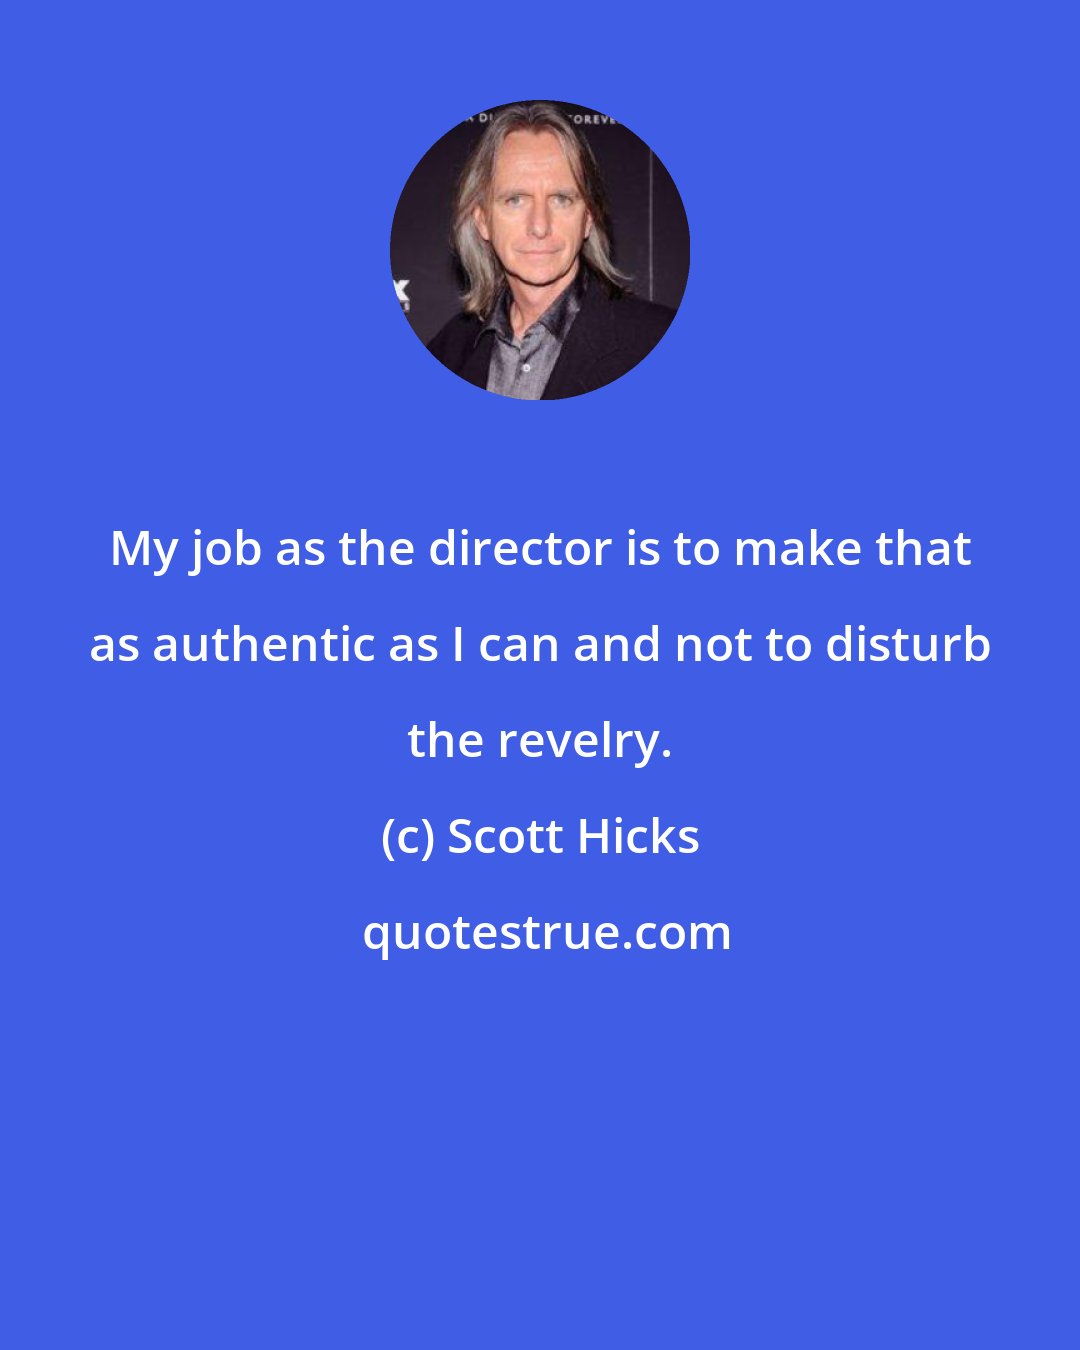 Scott Hicks: My job as the director is to make that as authentic as I can and not to disturb the revelry.